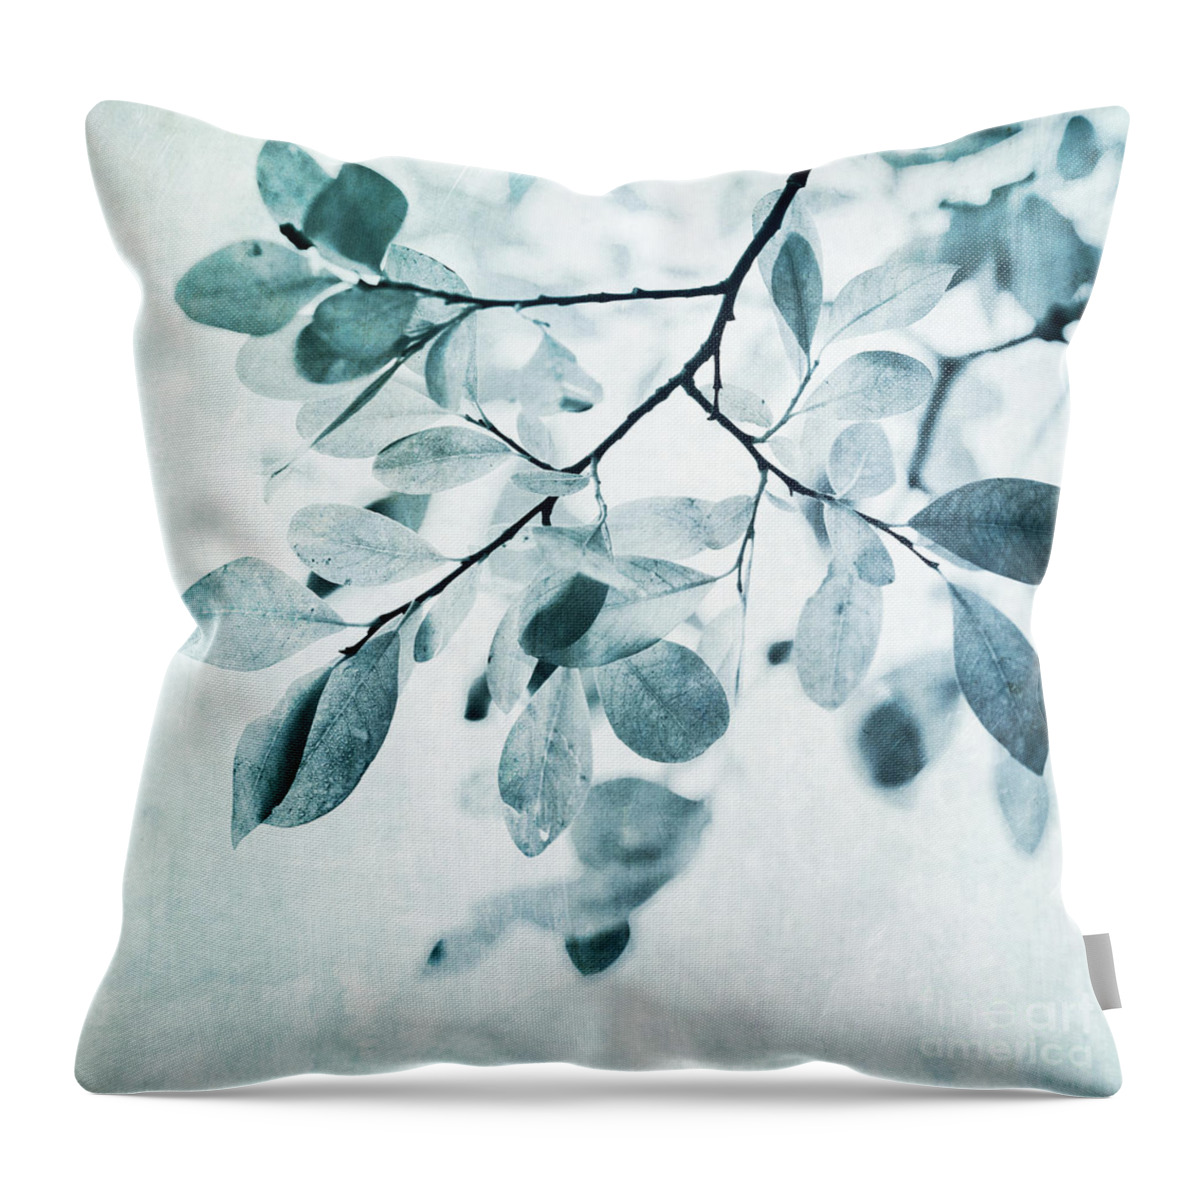 Foliage Throw Pillow featuring the photograph Leaves In Dusty Blue by Priska Wettstein